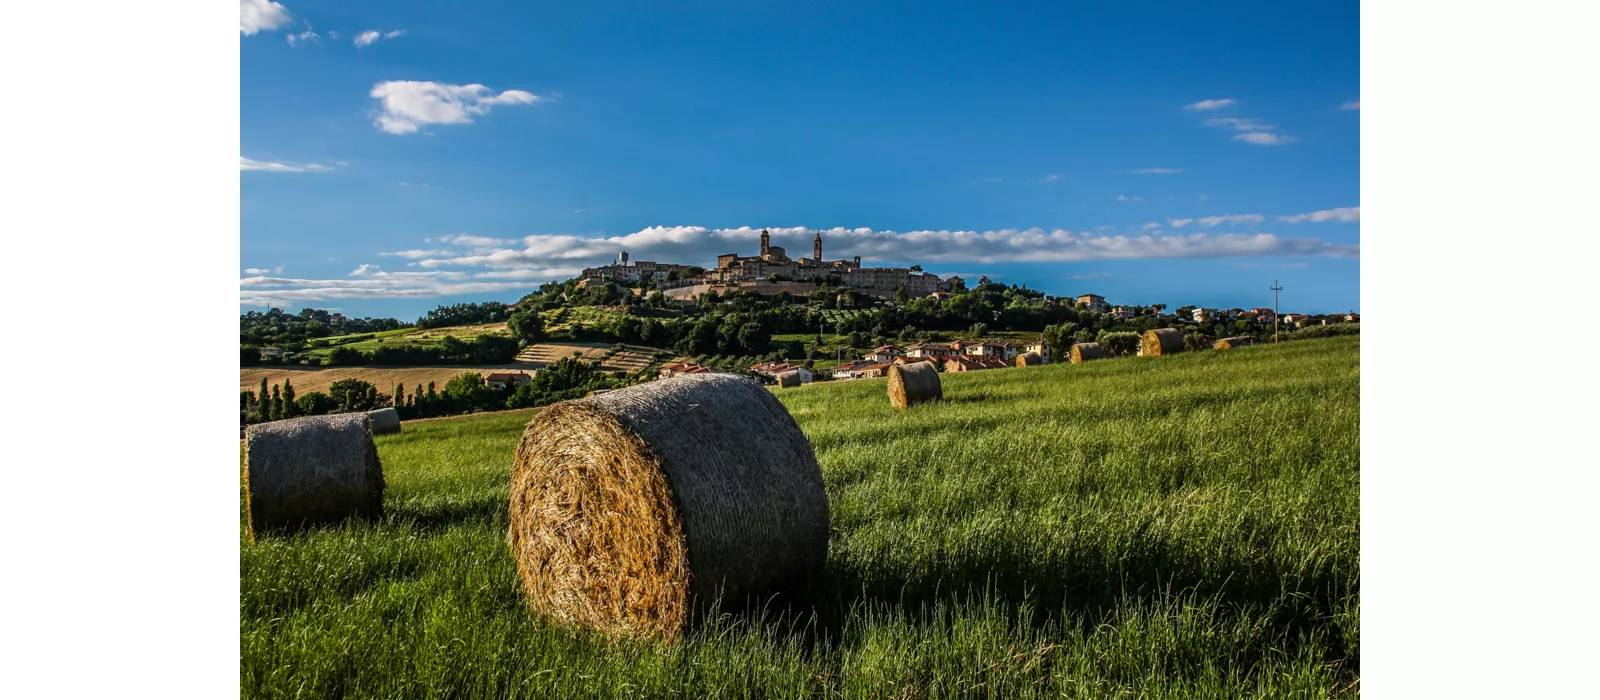 The flavours of the Macerata area and surroundings between tradition and looking to the future